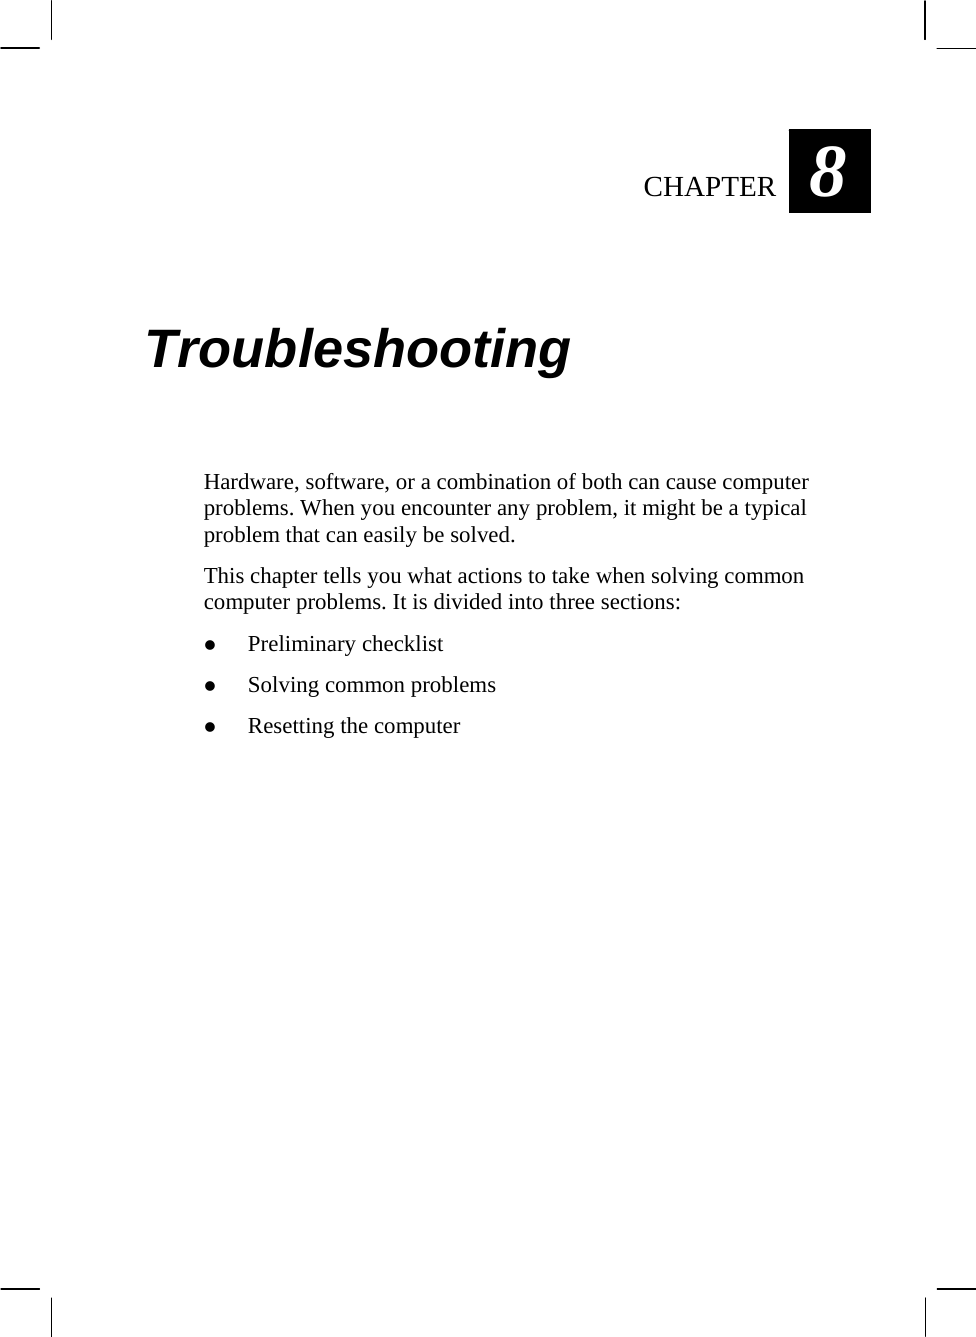  8CHAPTER   Troubleshooting Hardware, software, or a combination of both can cause computer problems. When you encounter any problem, it might be a typical problem that can easily be solved. This chapter tells you what actions to take when solving common computer problems. It is divided into three sections: z Preliminary checklist z Solving common problems z Resetting the computer  